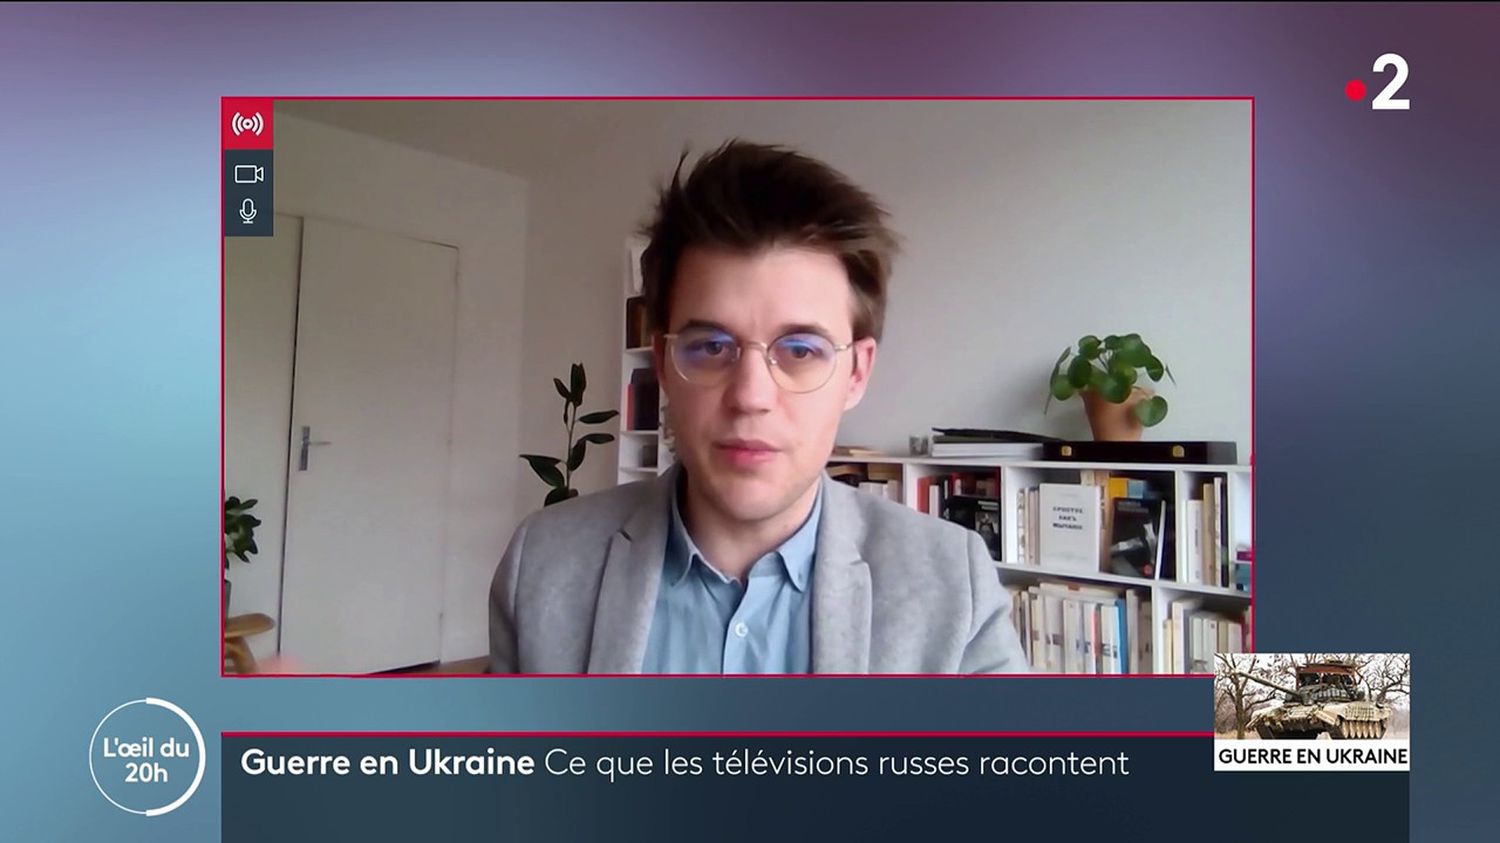 Interview with Maxime Audinet: "The fact that Ukraine has won the image battle does not mean that Russia has lost the information war"
